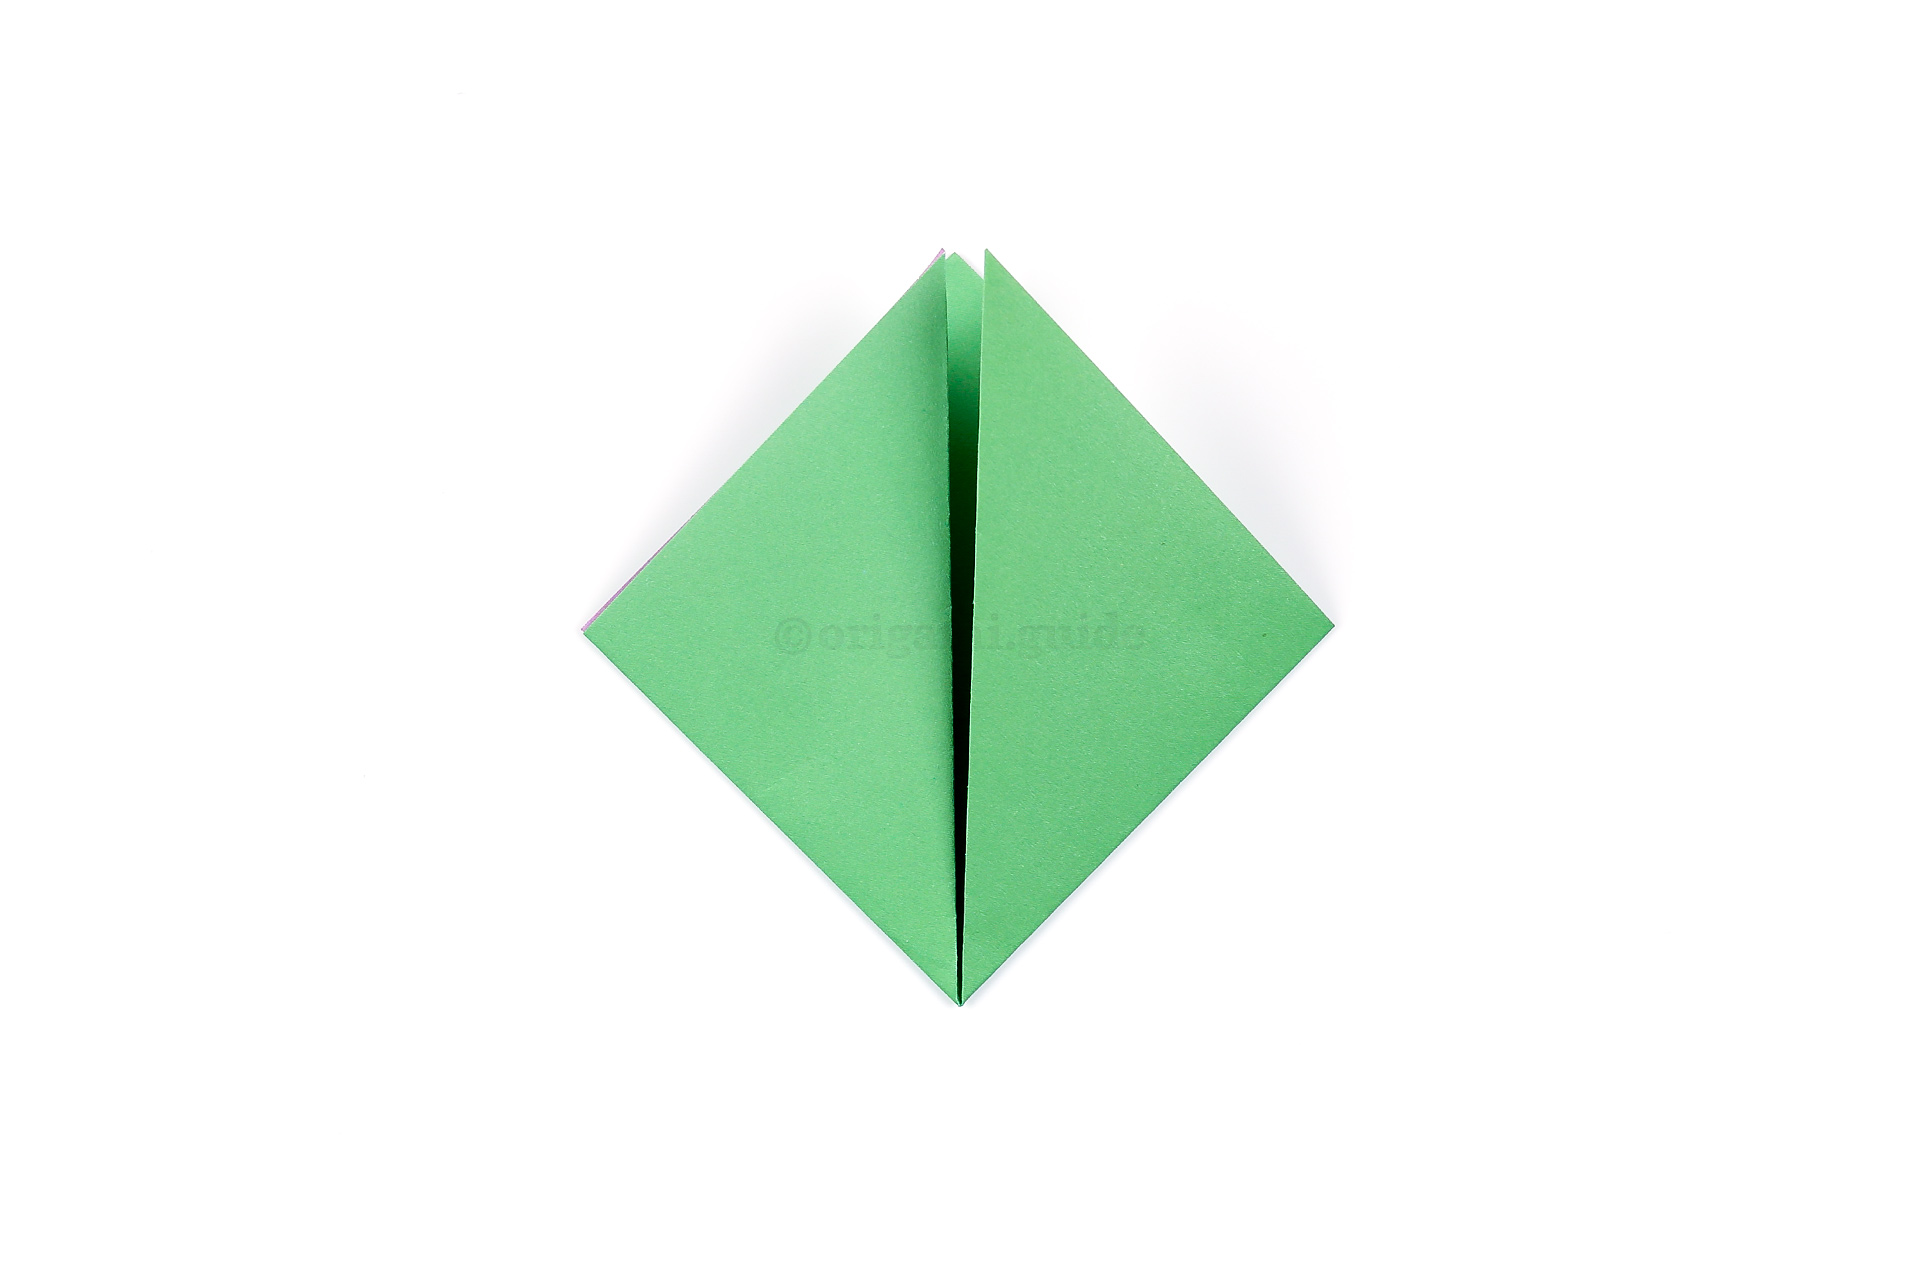 Fold the left point diagonally up to the top point as well.